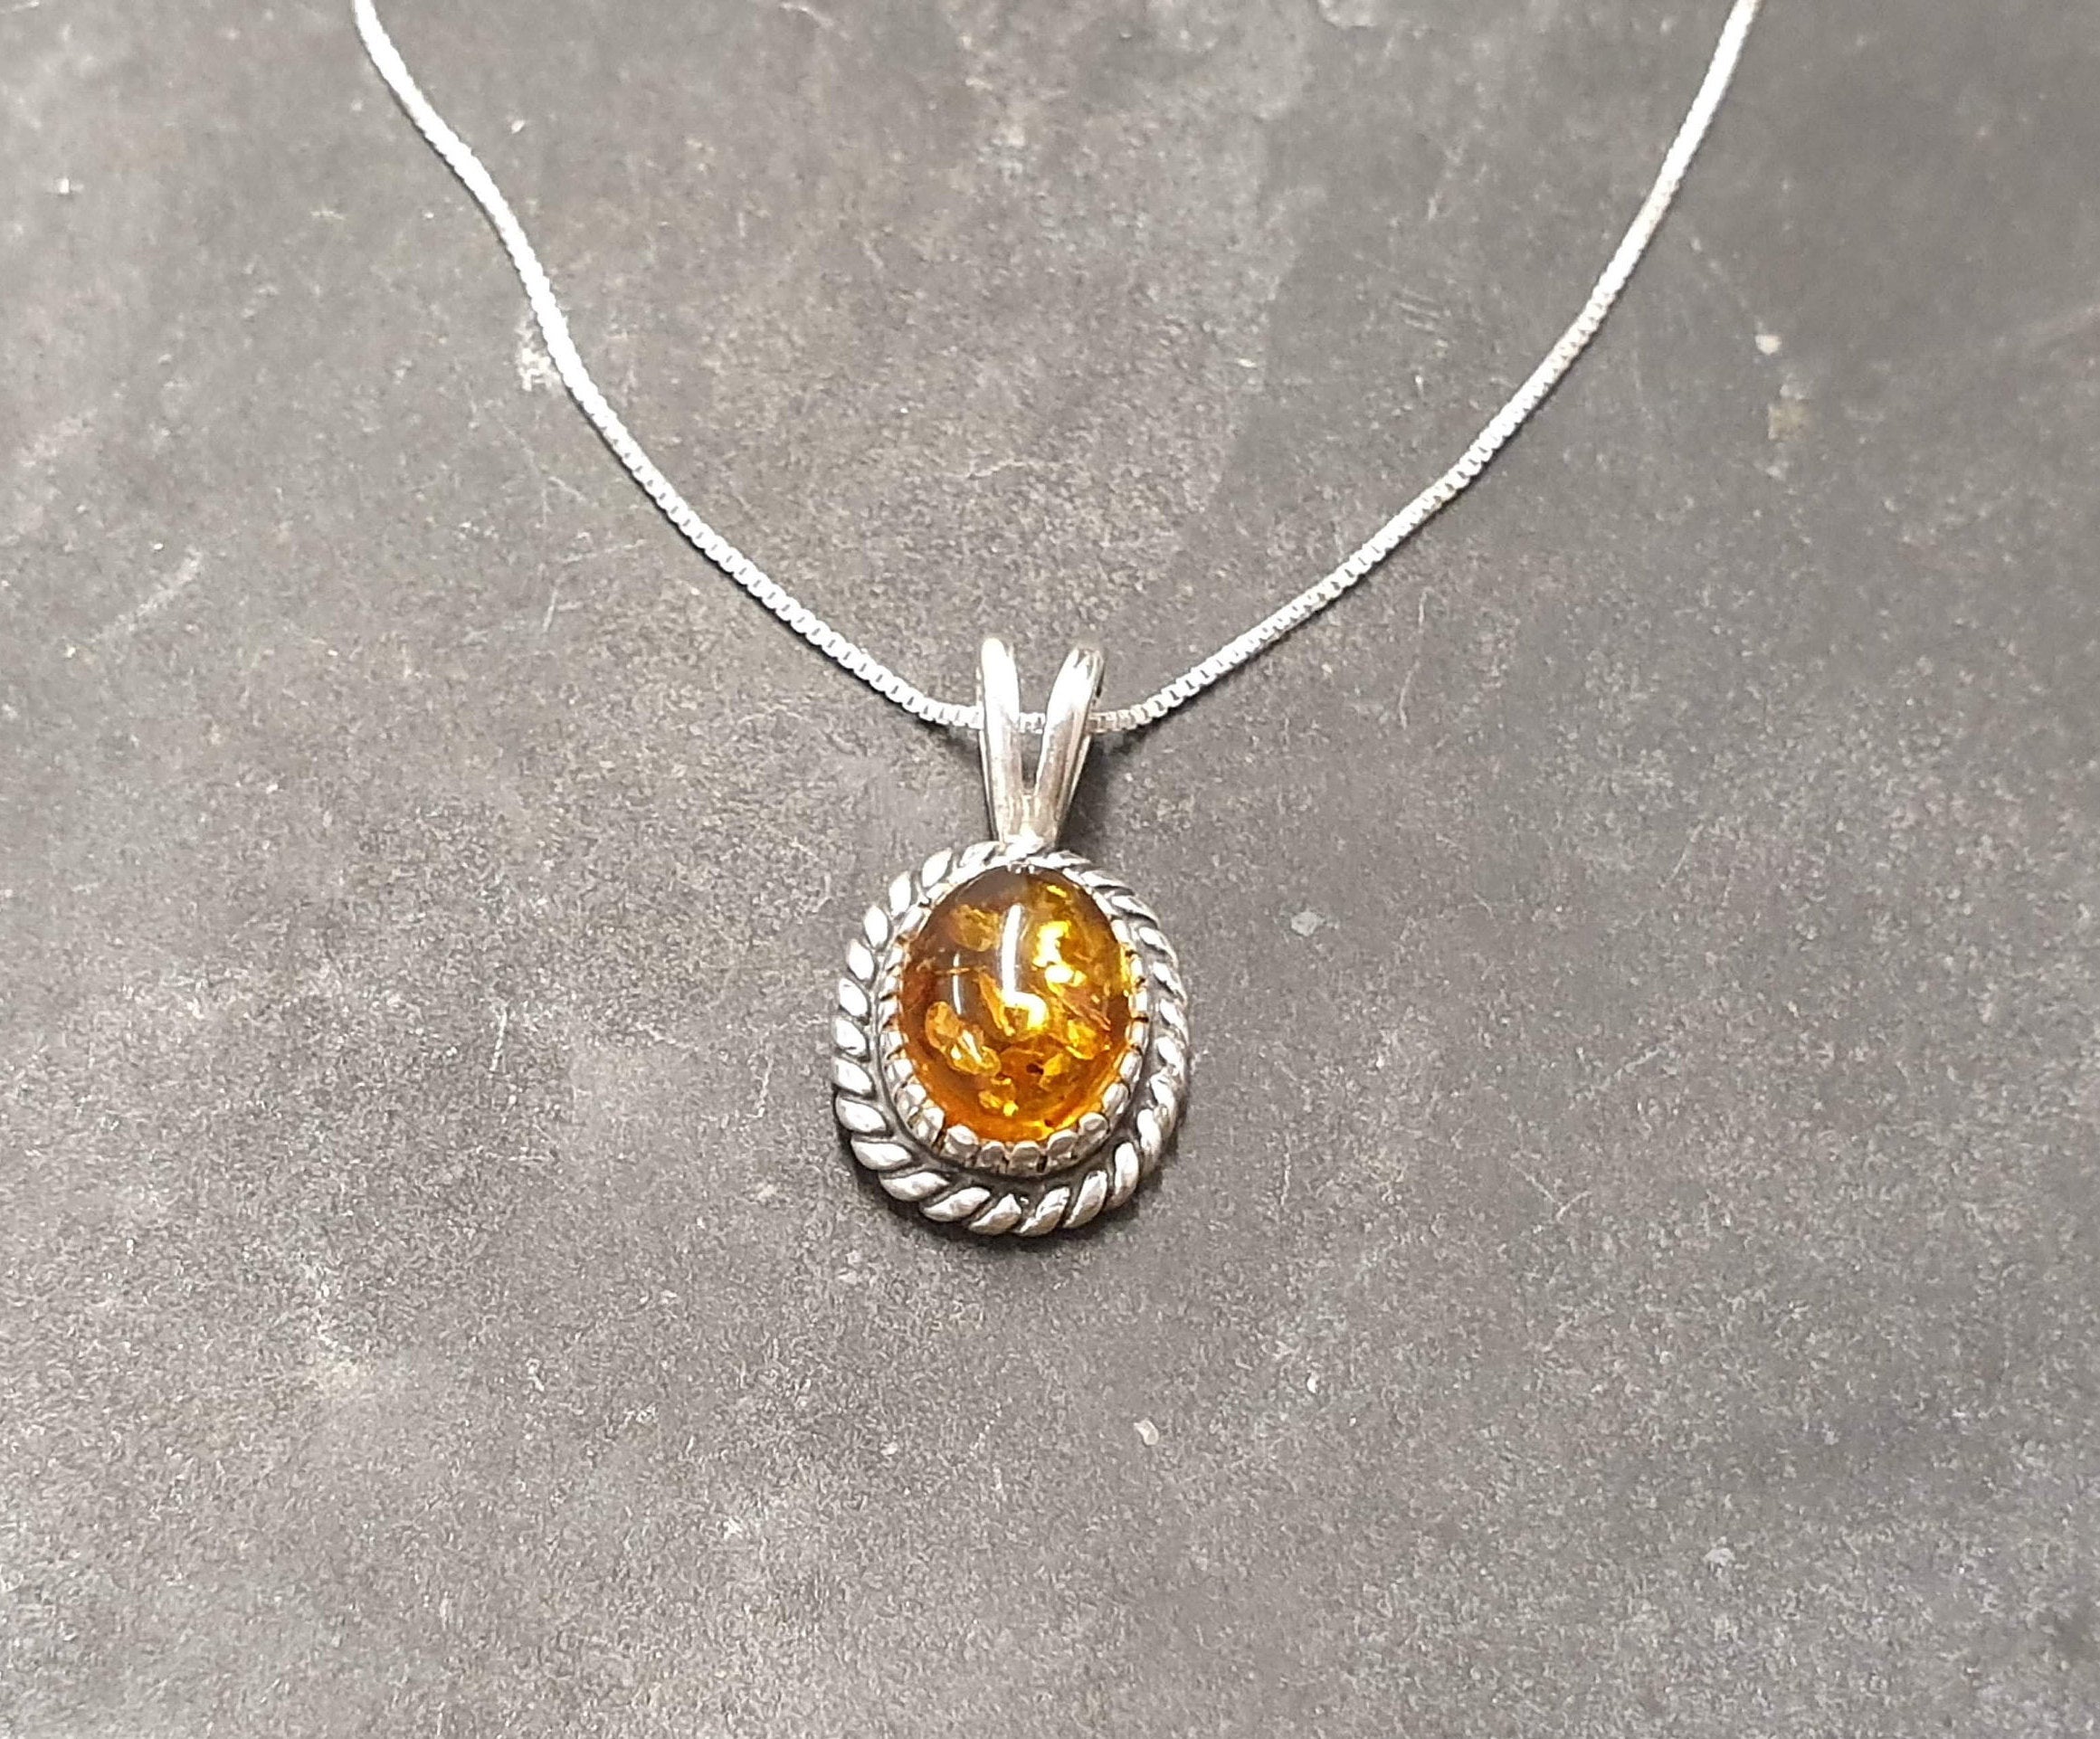 Amber Pendant, Natural Amber, Dainty Pendant, Vintage Pendant, Honey Stone Pendant, Small Amber Pendant, Gold Stone, Solid Silver Pendant